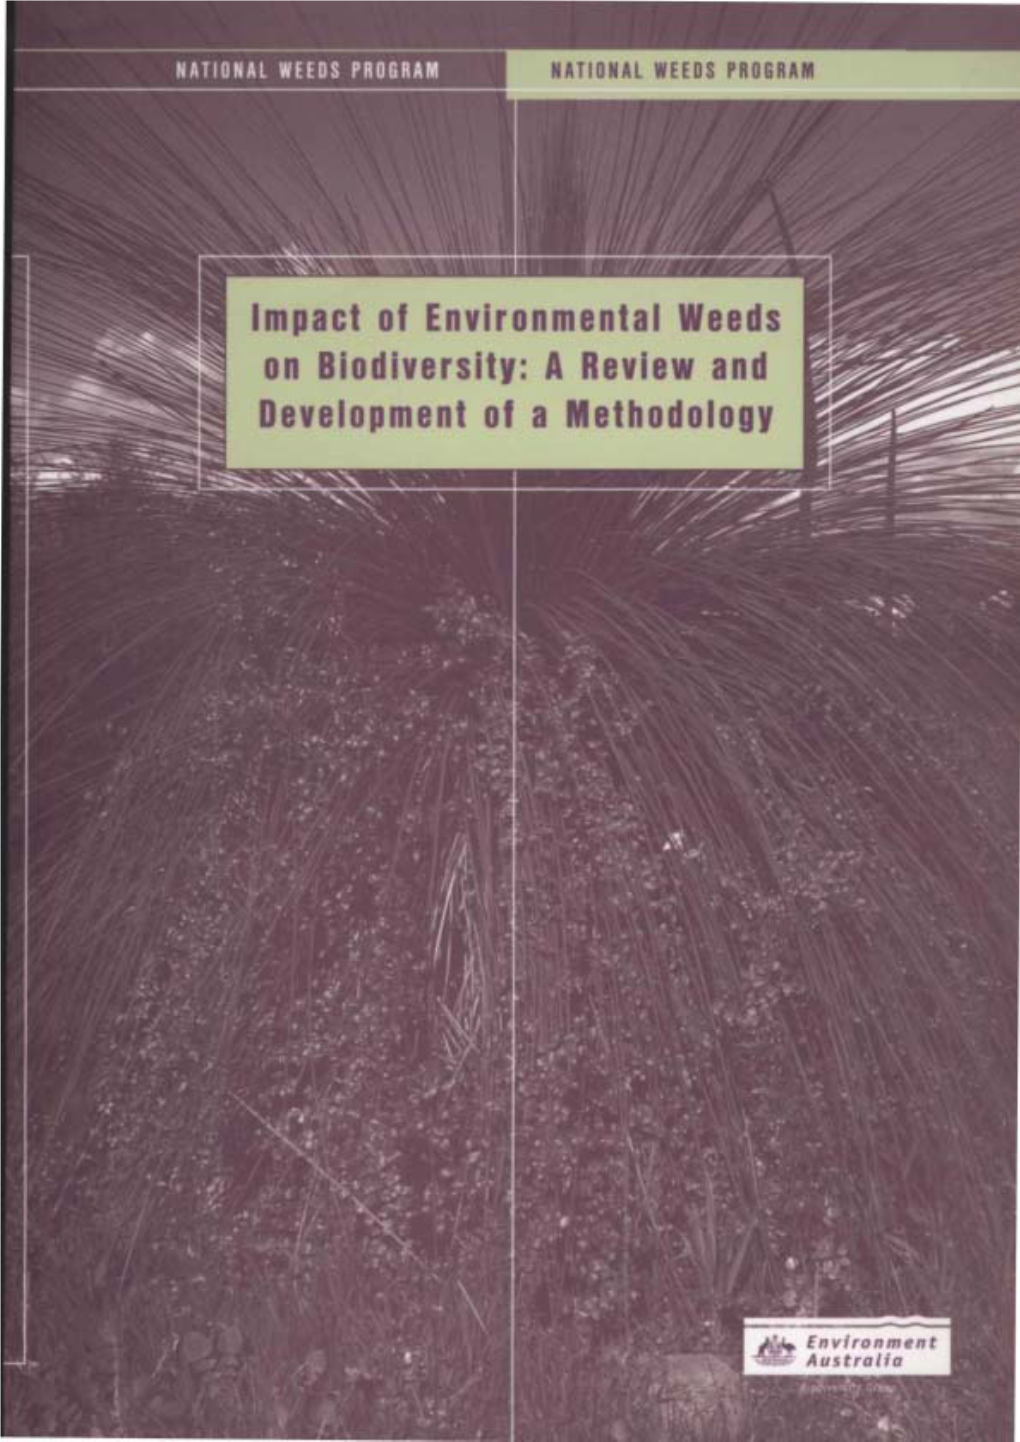 Impact of Environmental Weeds on Biodiversity: a Review and Development of a Methodology